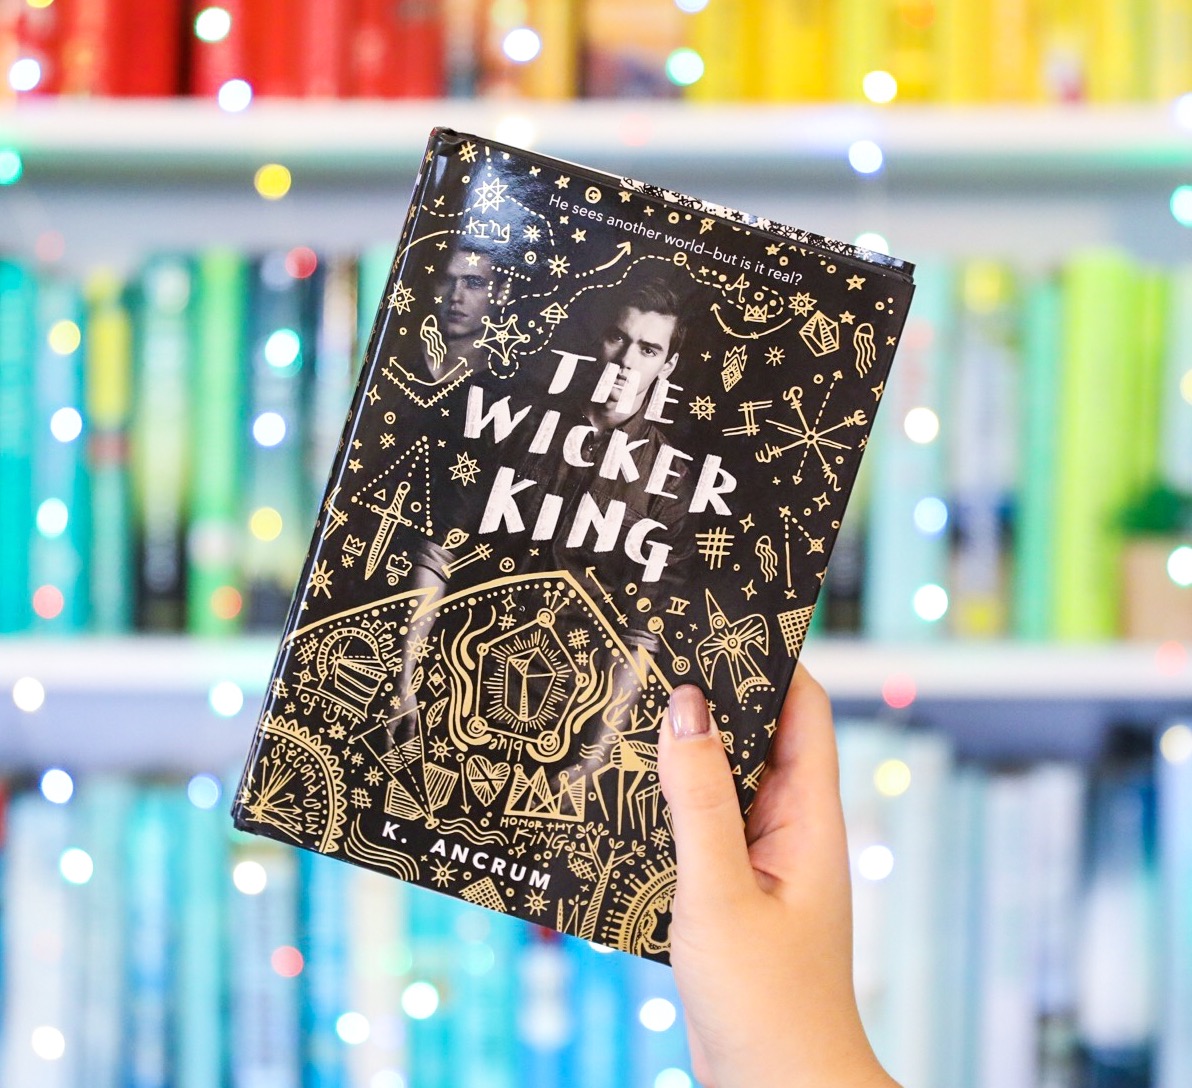 This book. The Wicker King book Art. This book yet